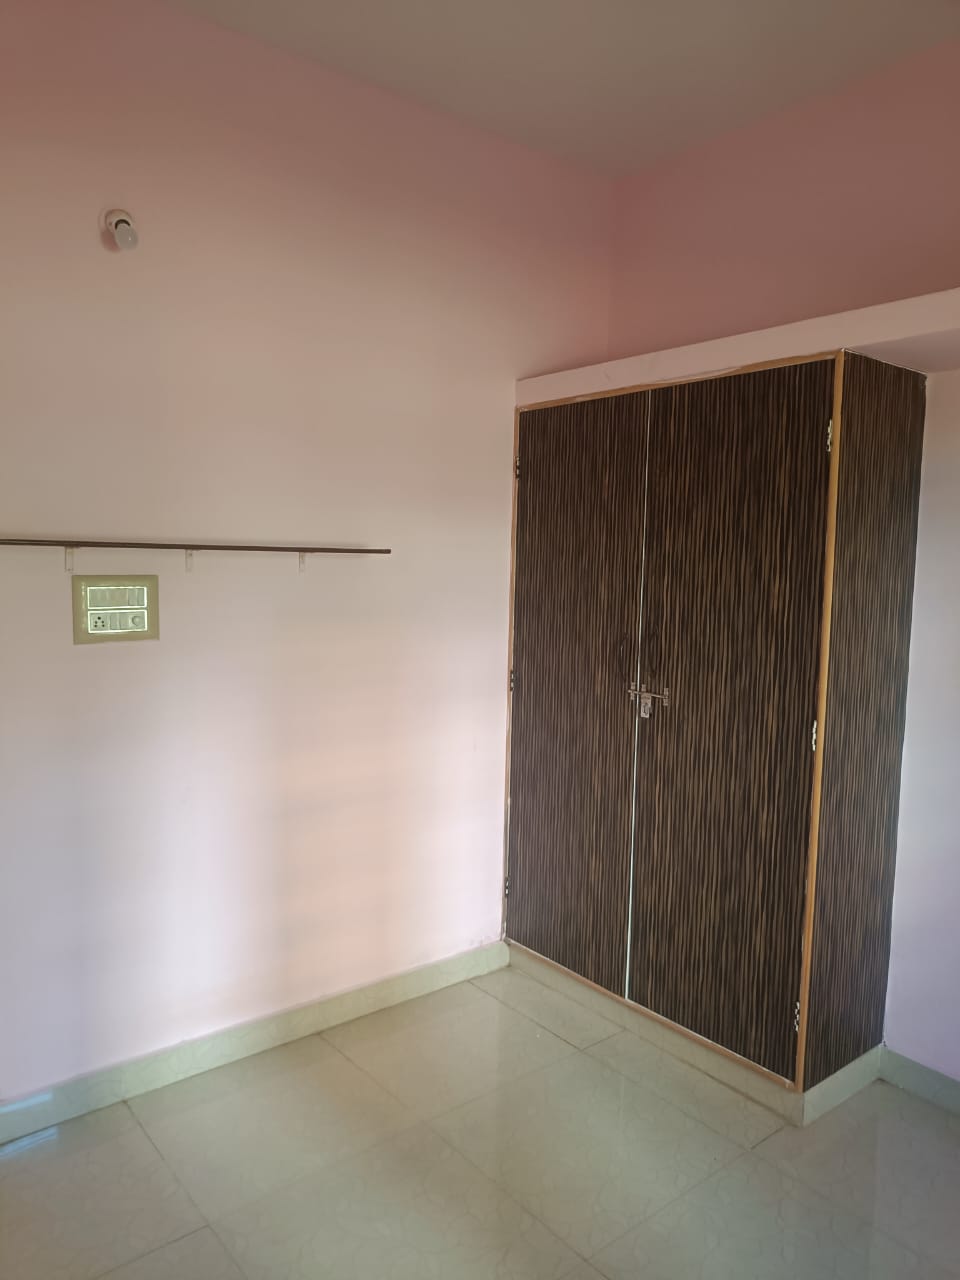 2 BHK Residential Apartment for Lease Only at JAML2 - 4683-22lakh in Sarjapur